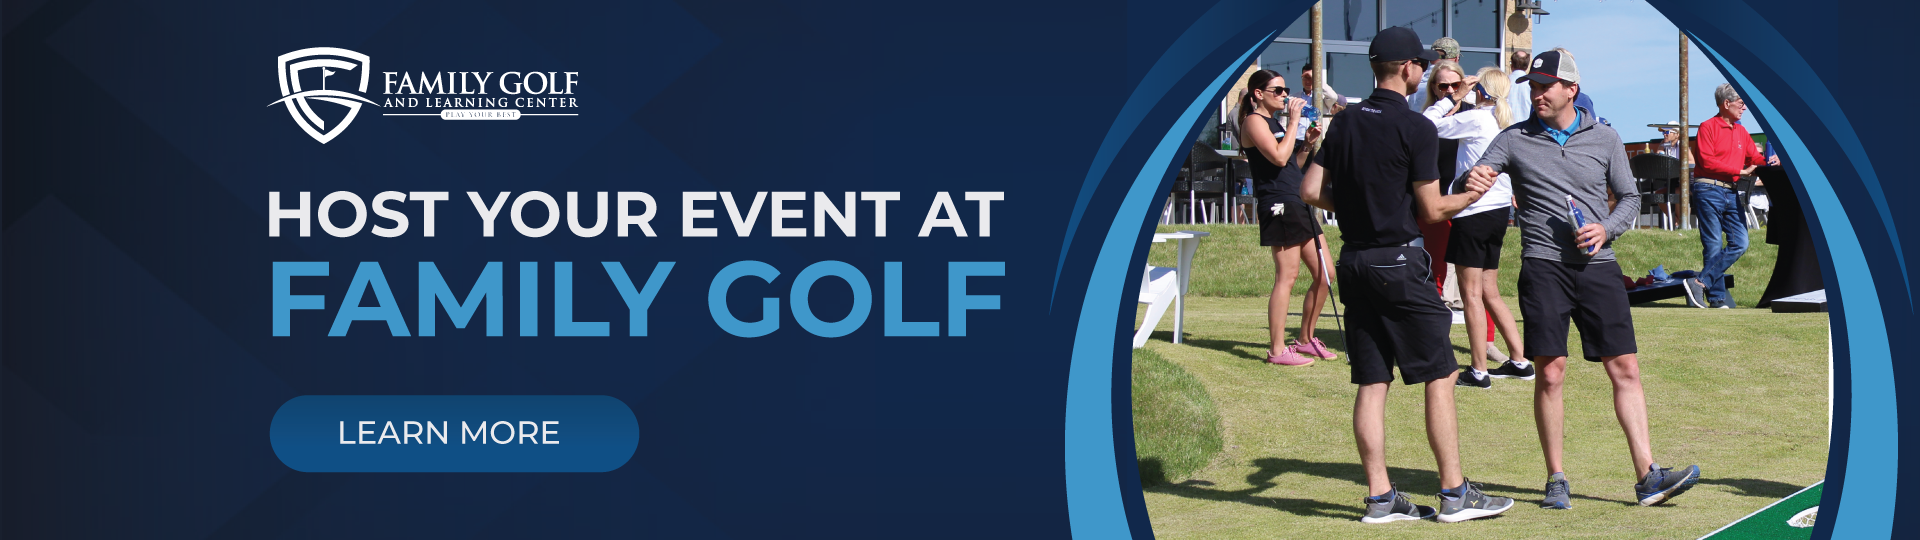 Host your event at Family Golf